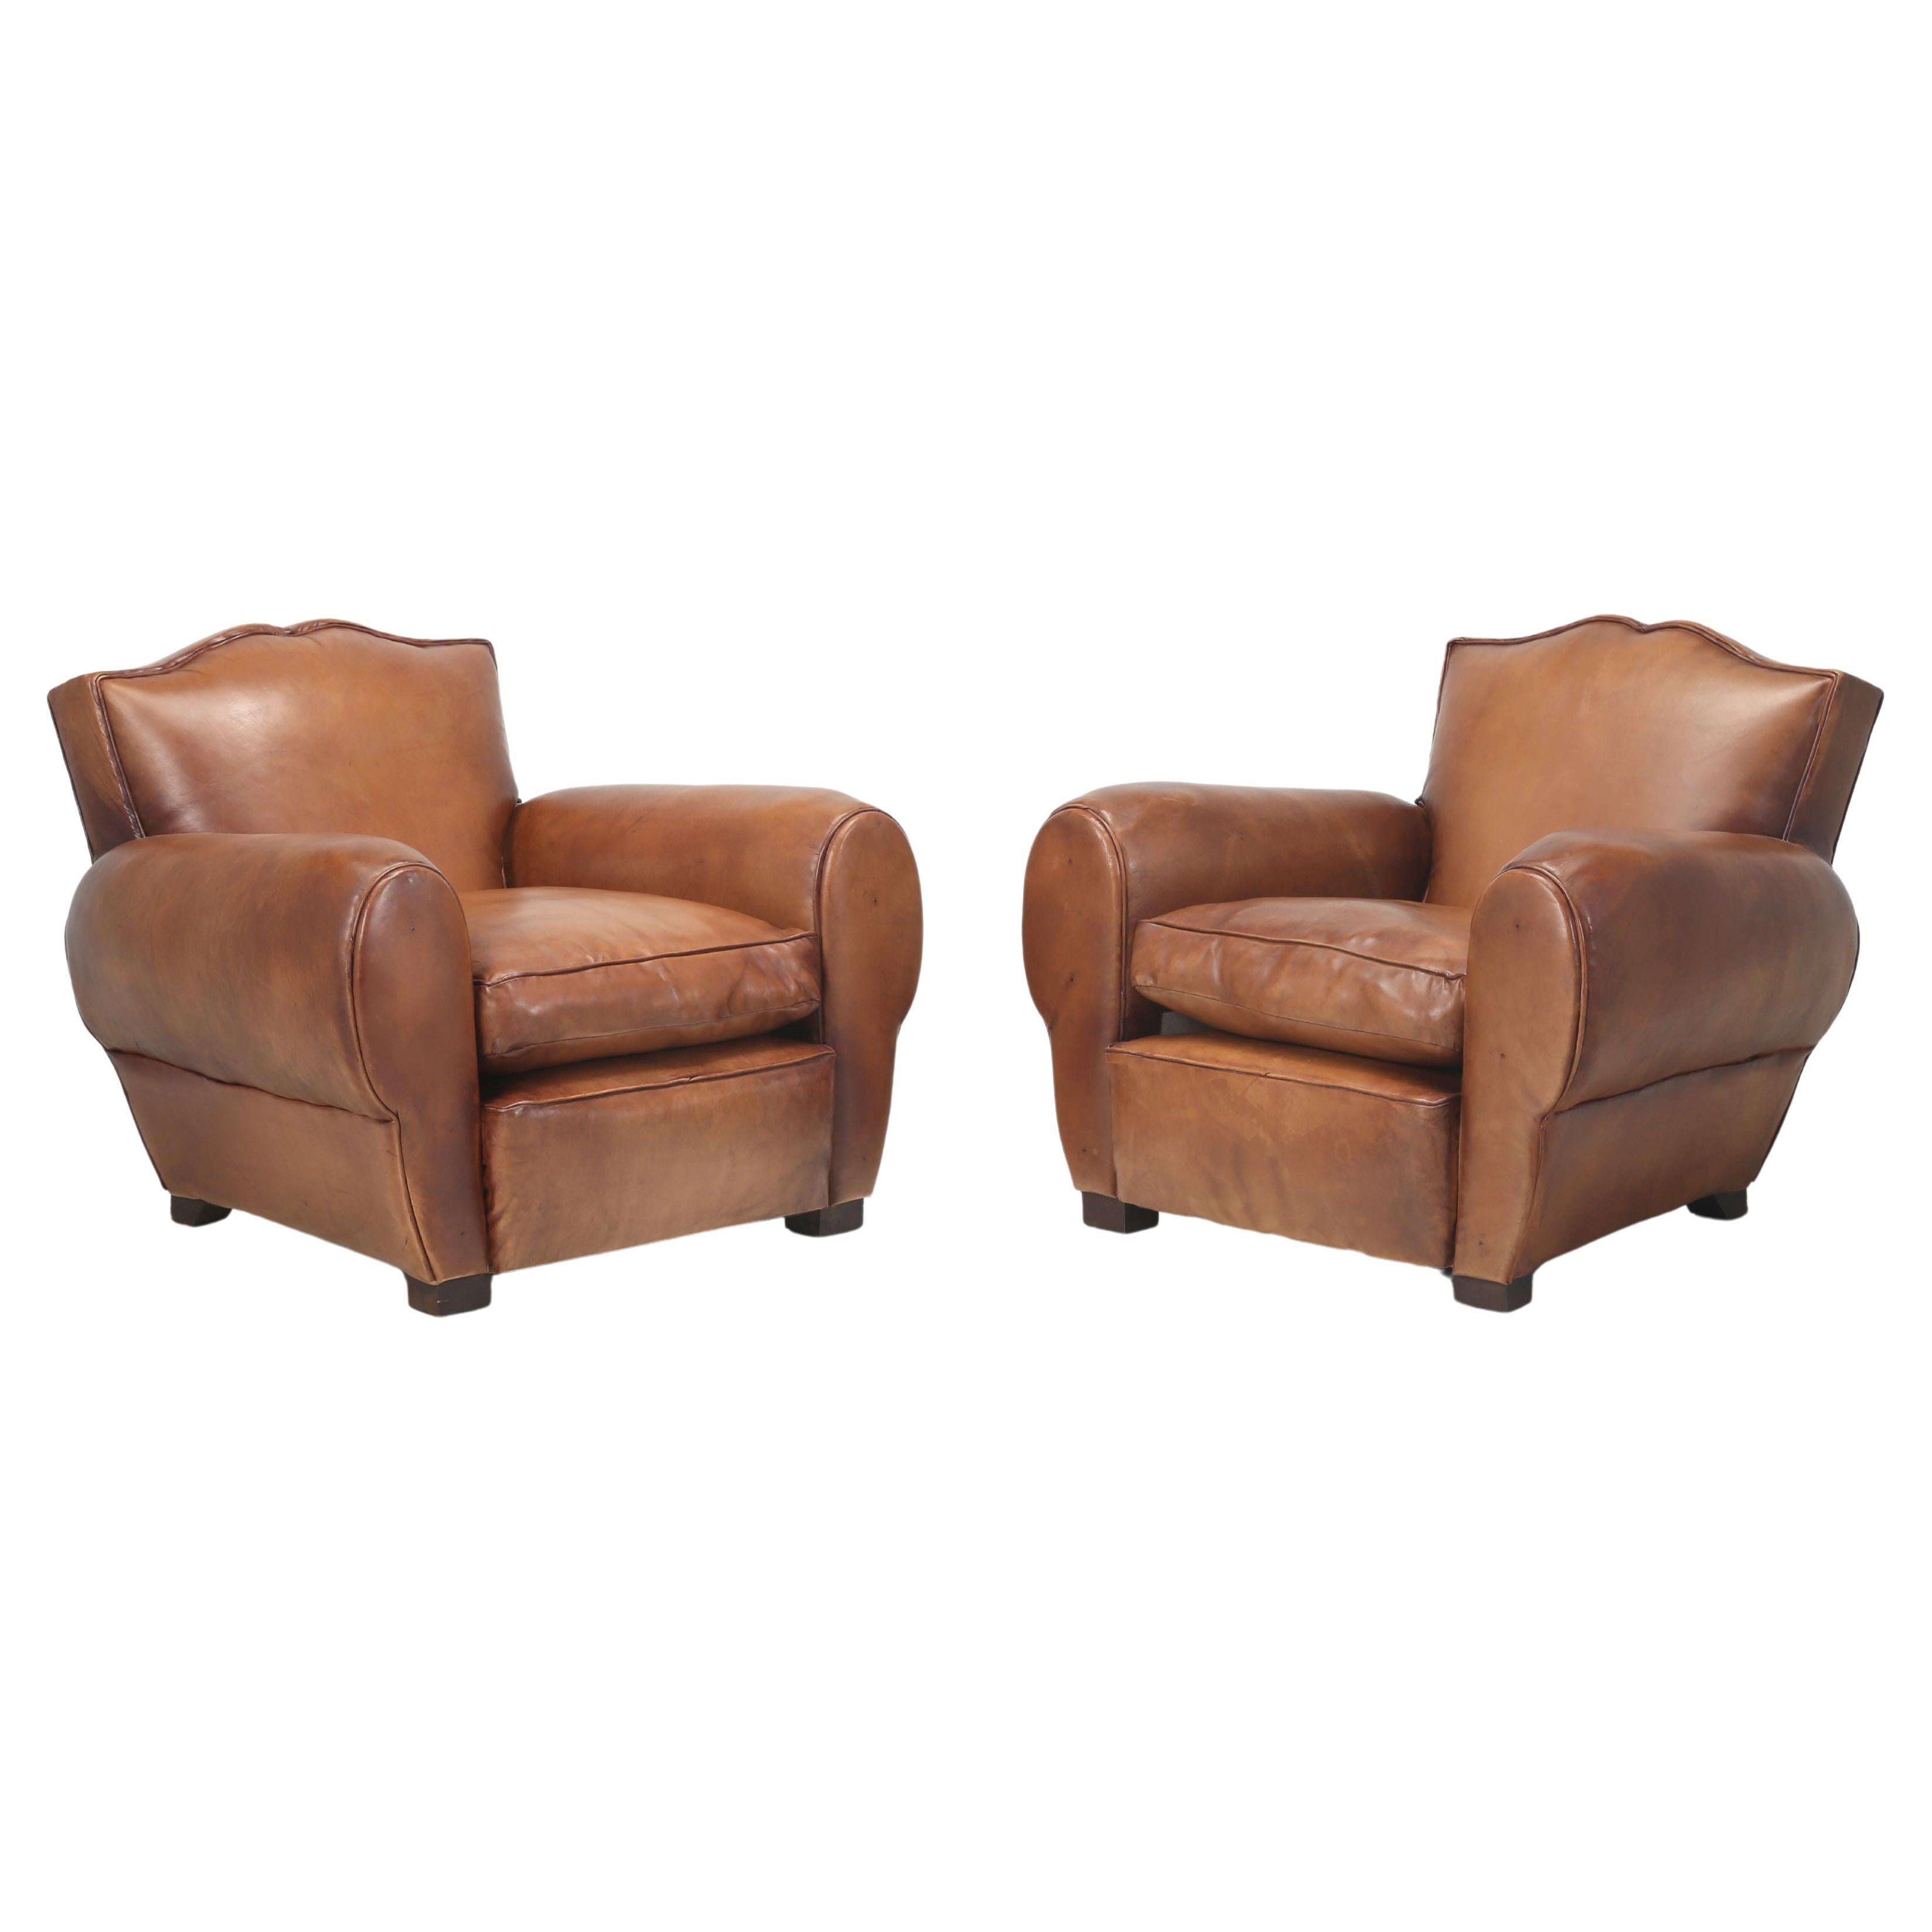 Pair French Leather Club Chairs Restored in France New Sheep's Leather c1930's